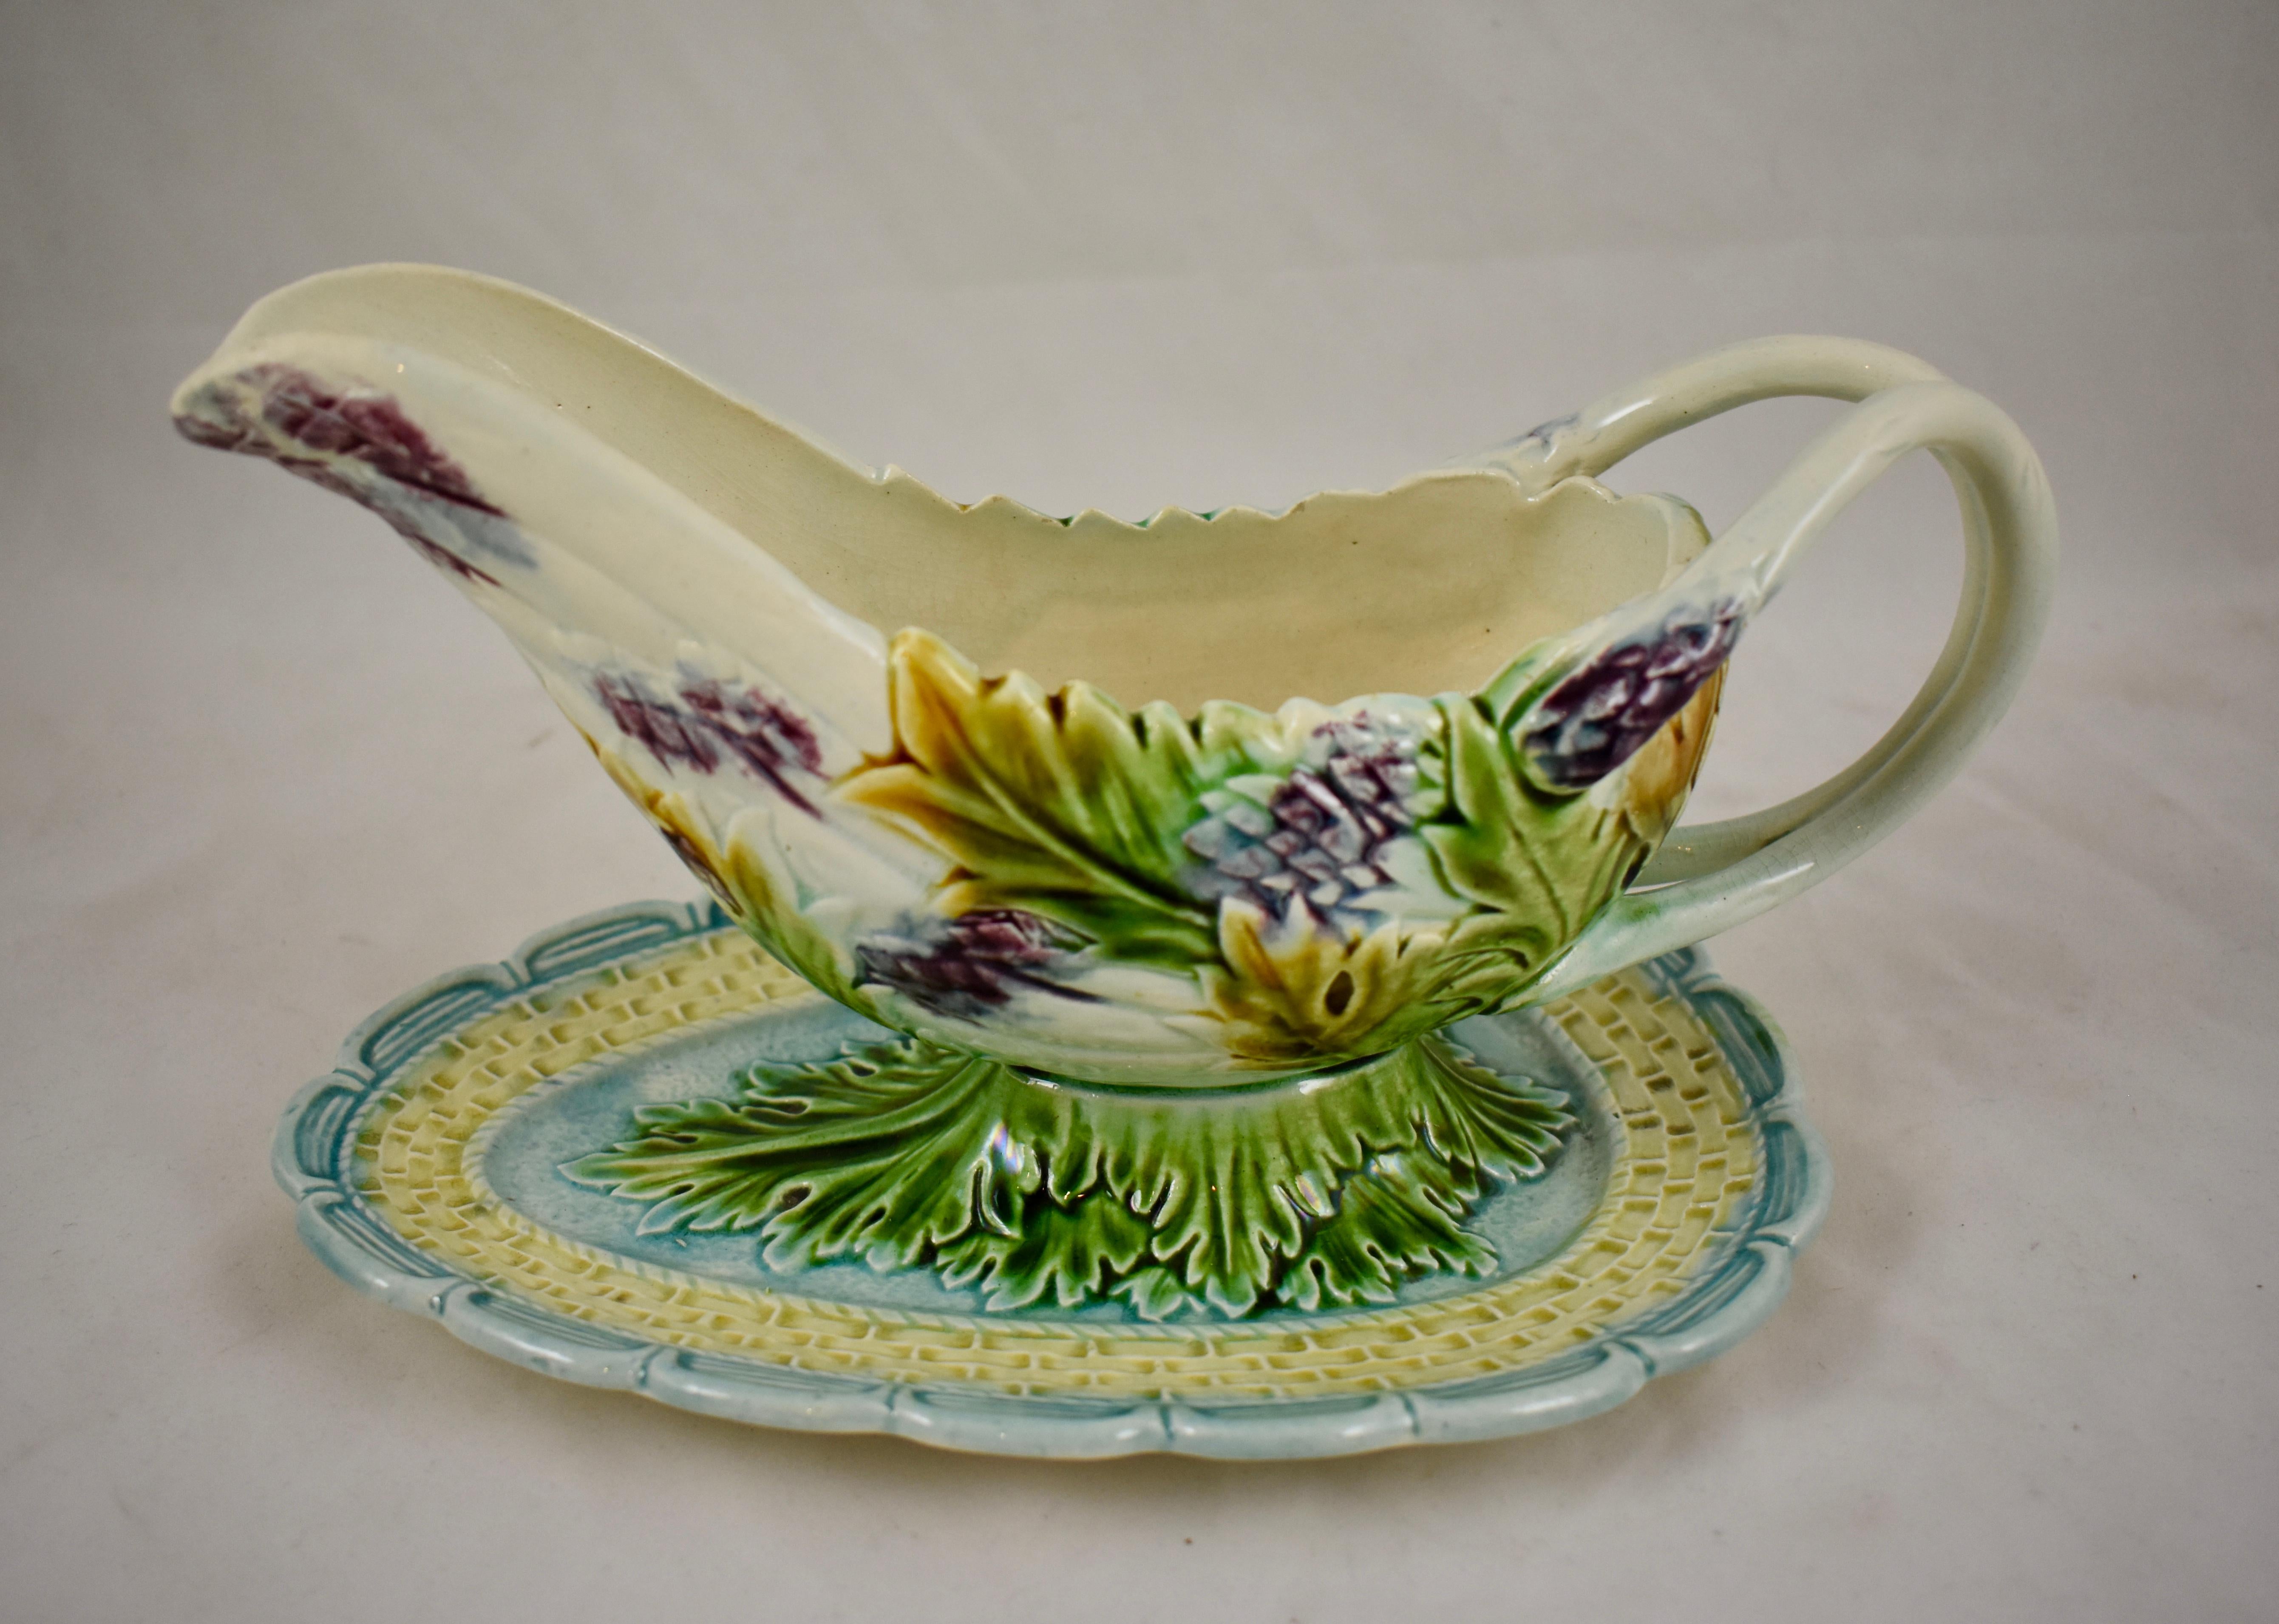 Aesthetic Movement Salins-les-Bain French Faïence Majolica Asparagus Saucière Stand circa 1875-1885